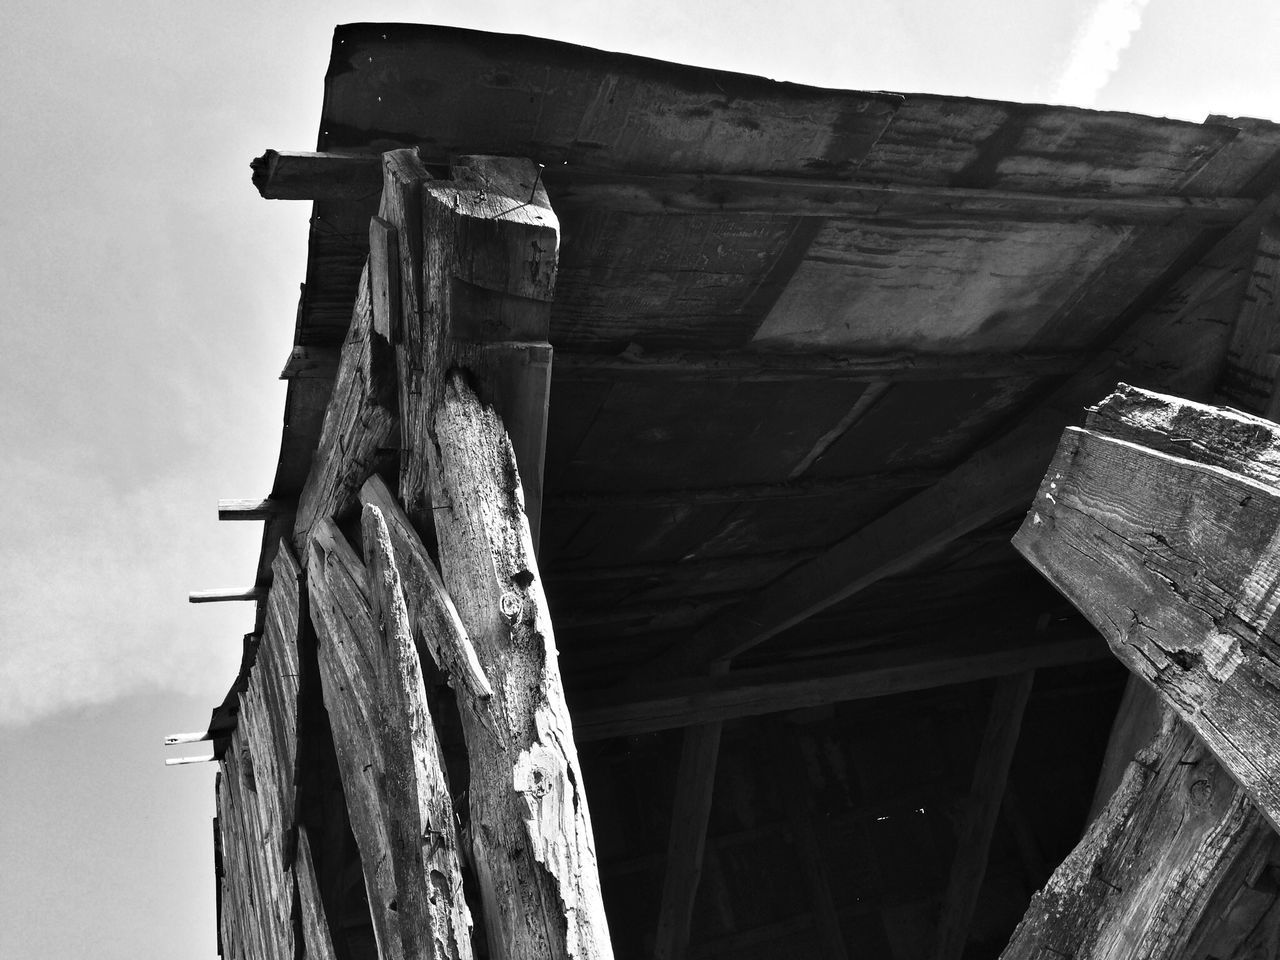 architecture, built structure, building exterior, old, damaged, low angle view, abandoned, sky, wood - material, run-down, obsolete, weathered, deterioration, old ruin, ruined, destruction, day, wooden, outdoors, history